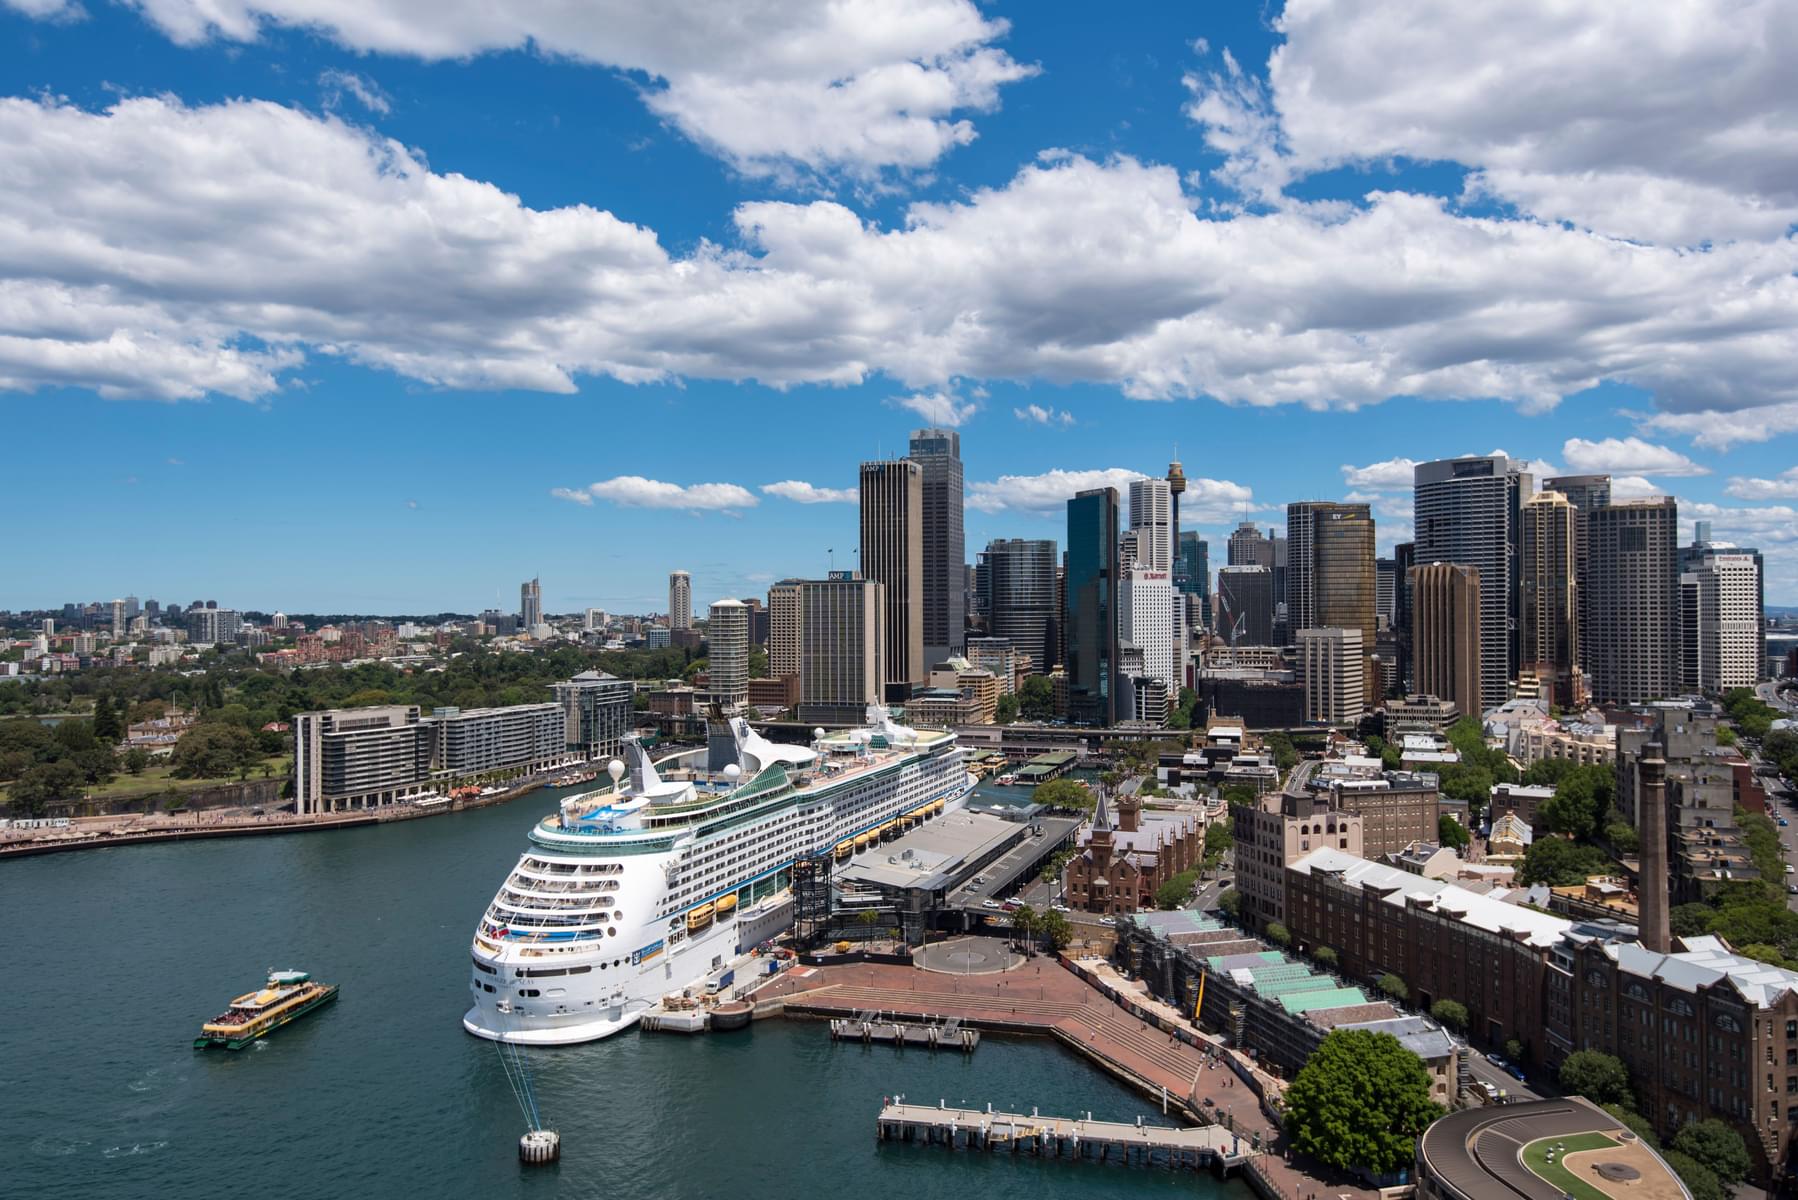 Why To Book Sydney Harbour Lunch Cruise?